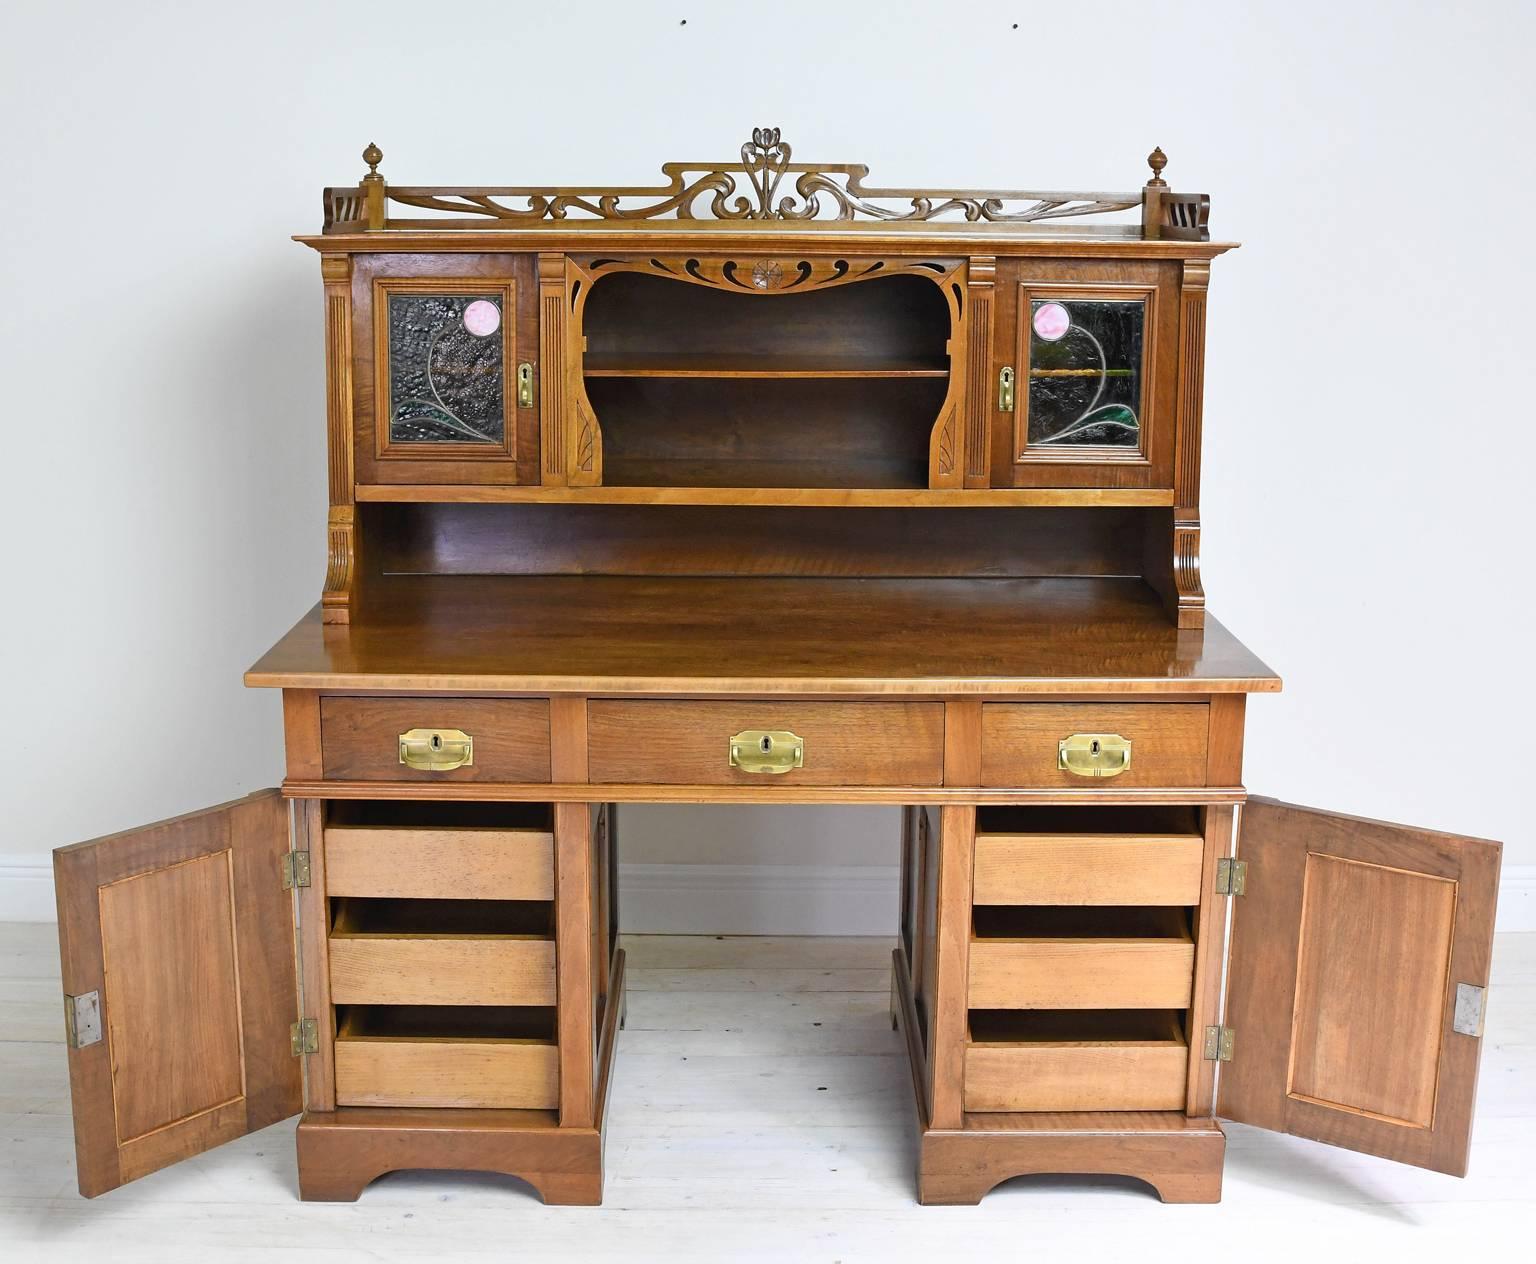 Belgian Art Nouveau Walnut Pedestal Desk with Upper Cabinet and Stained Glass, C. 1900 For Sale